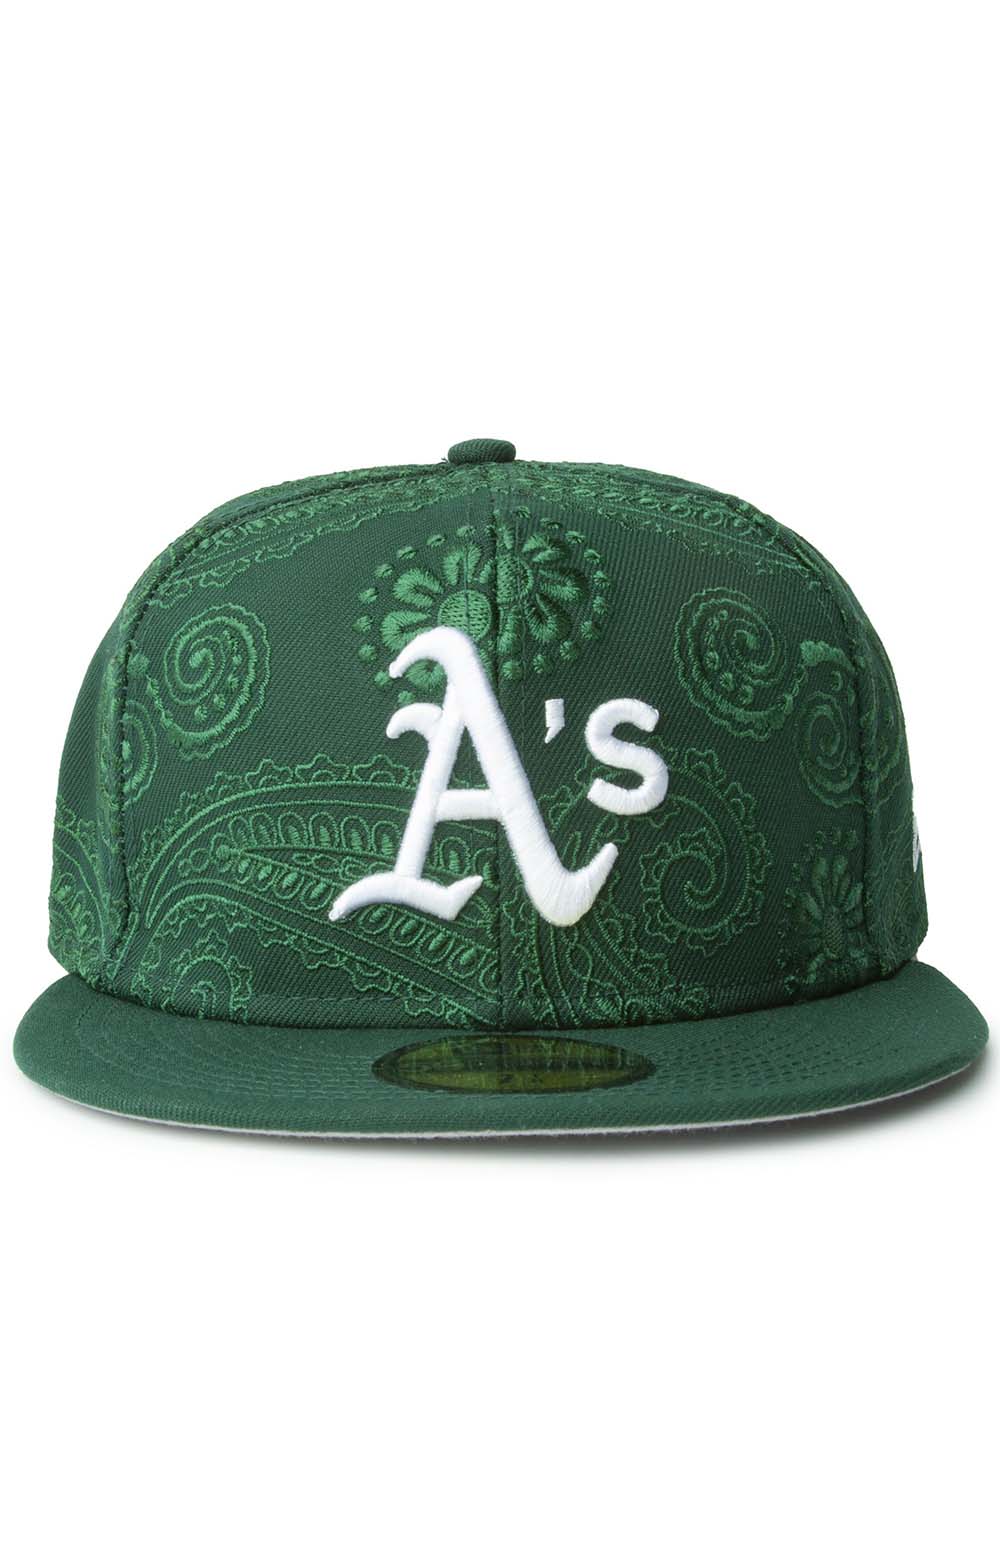 Oakland Athletics Swirl 59FIFTY Fitted Hat